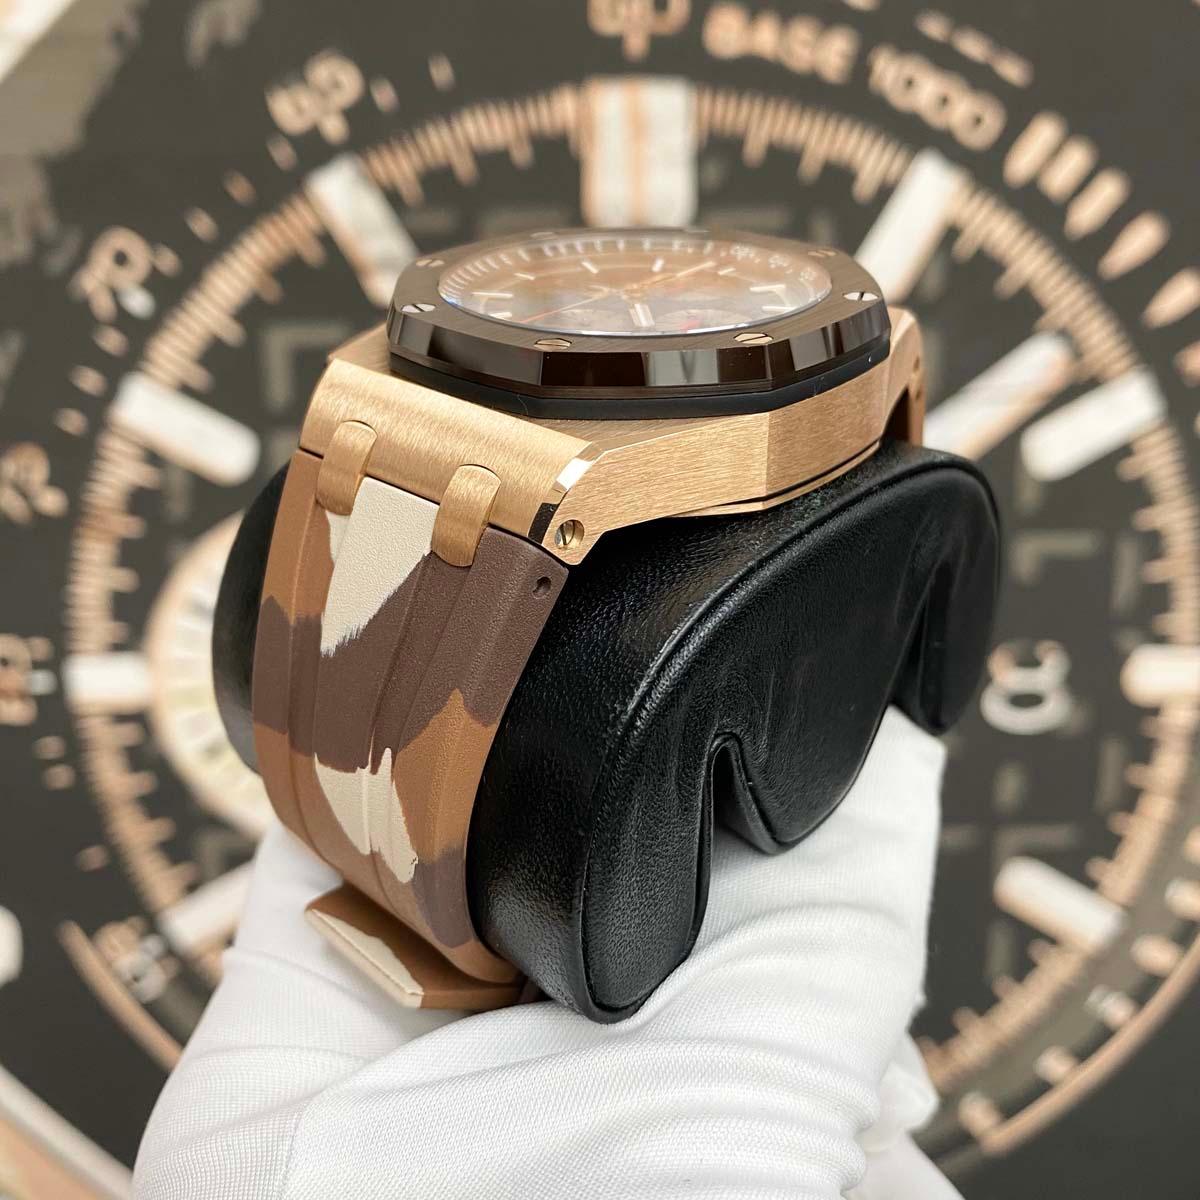 Audemars Piguet Limited Edition Royal Oak Offshore Chronograph 44mm 26401RO Brown Dial Pre-Owned - Gotham Trading 